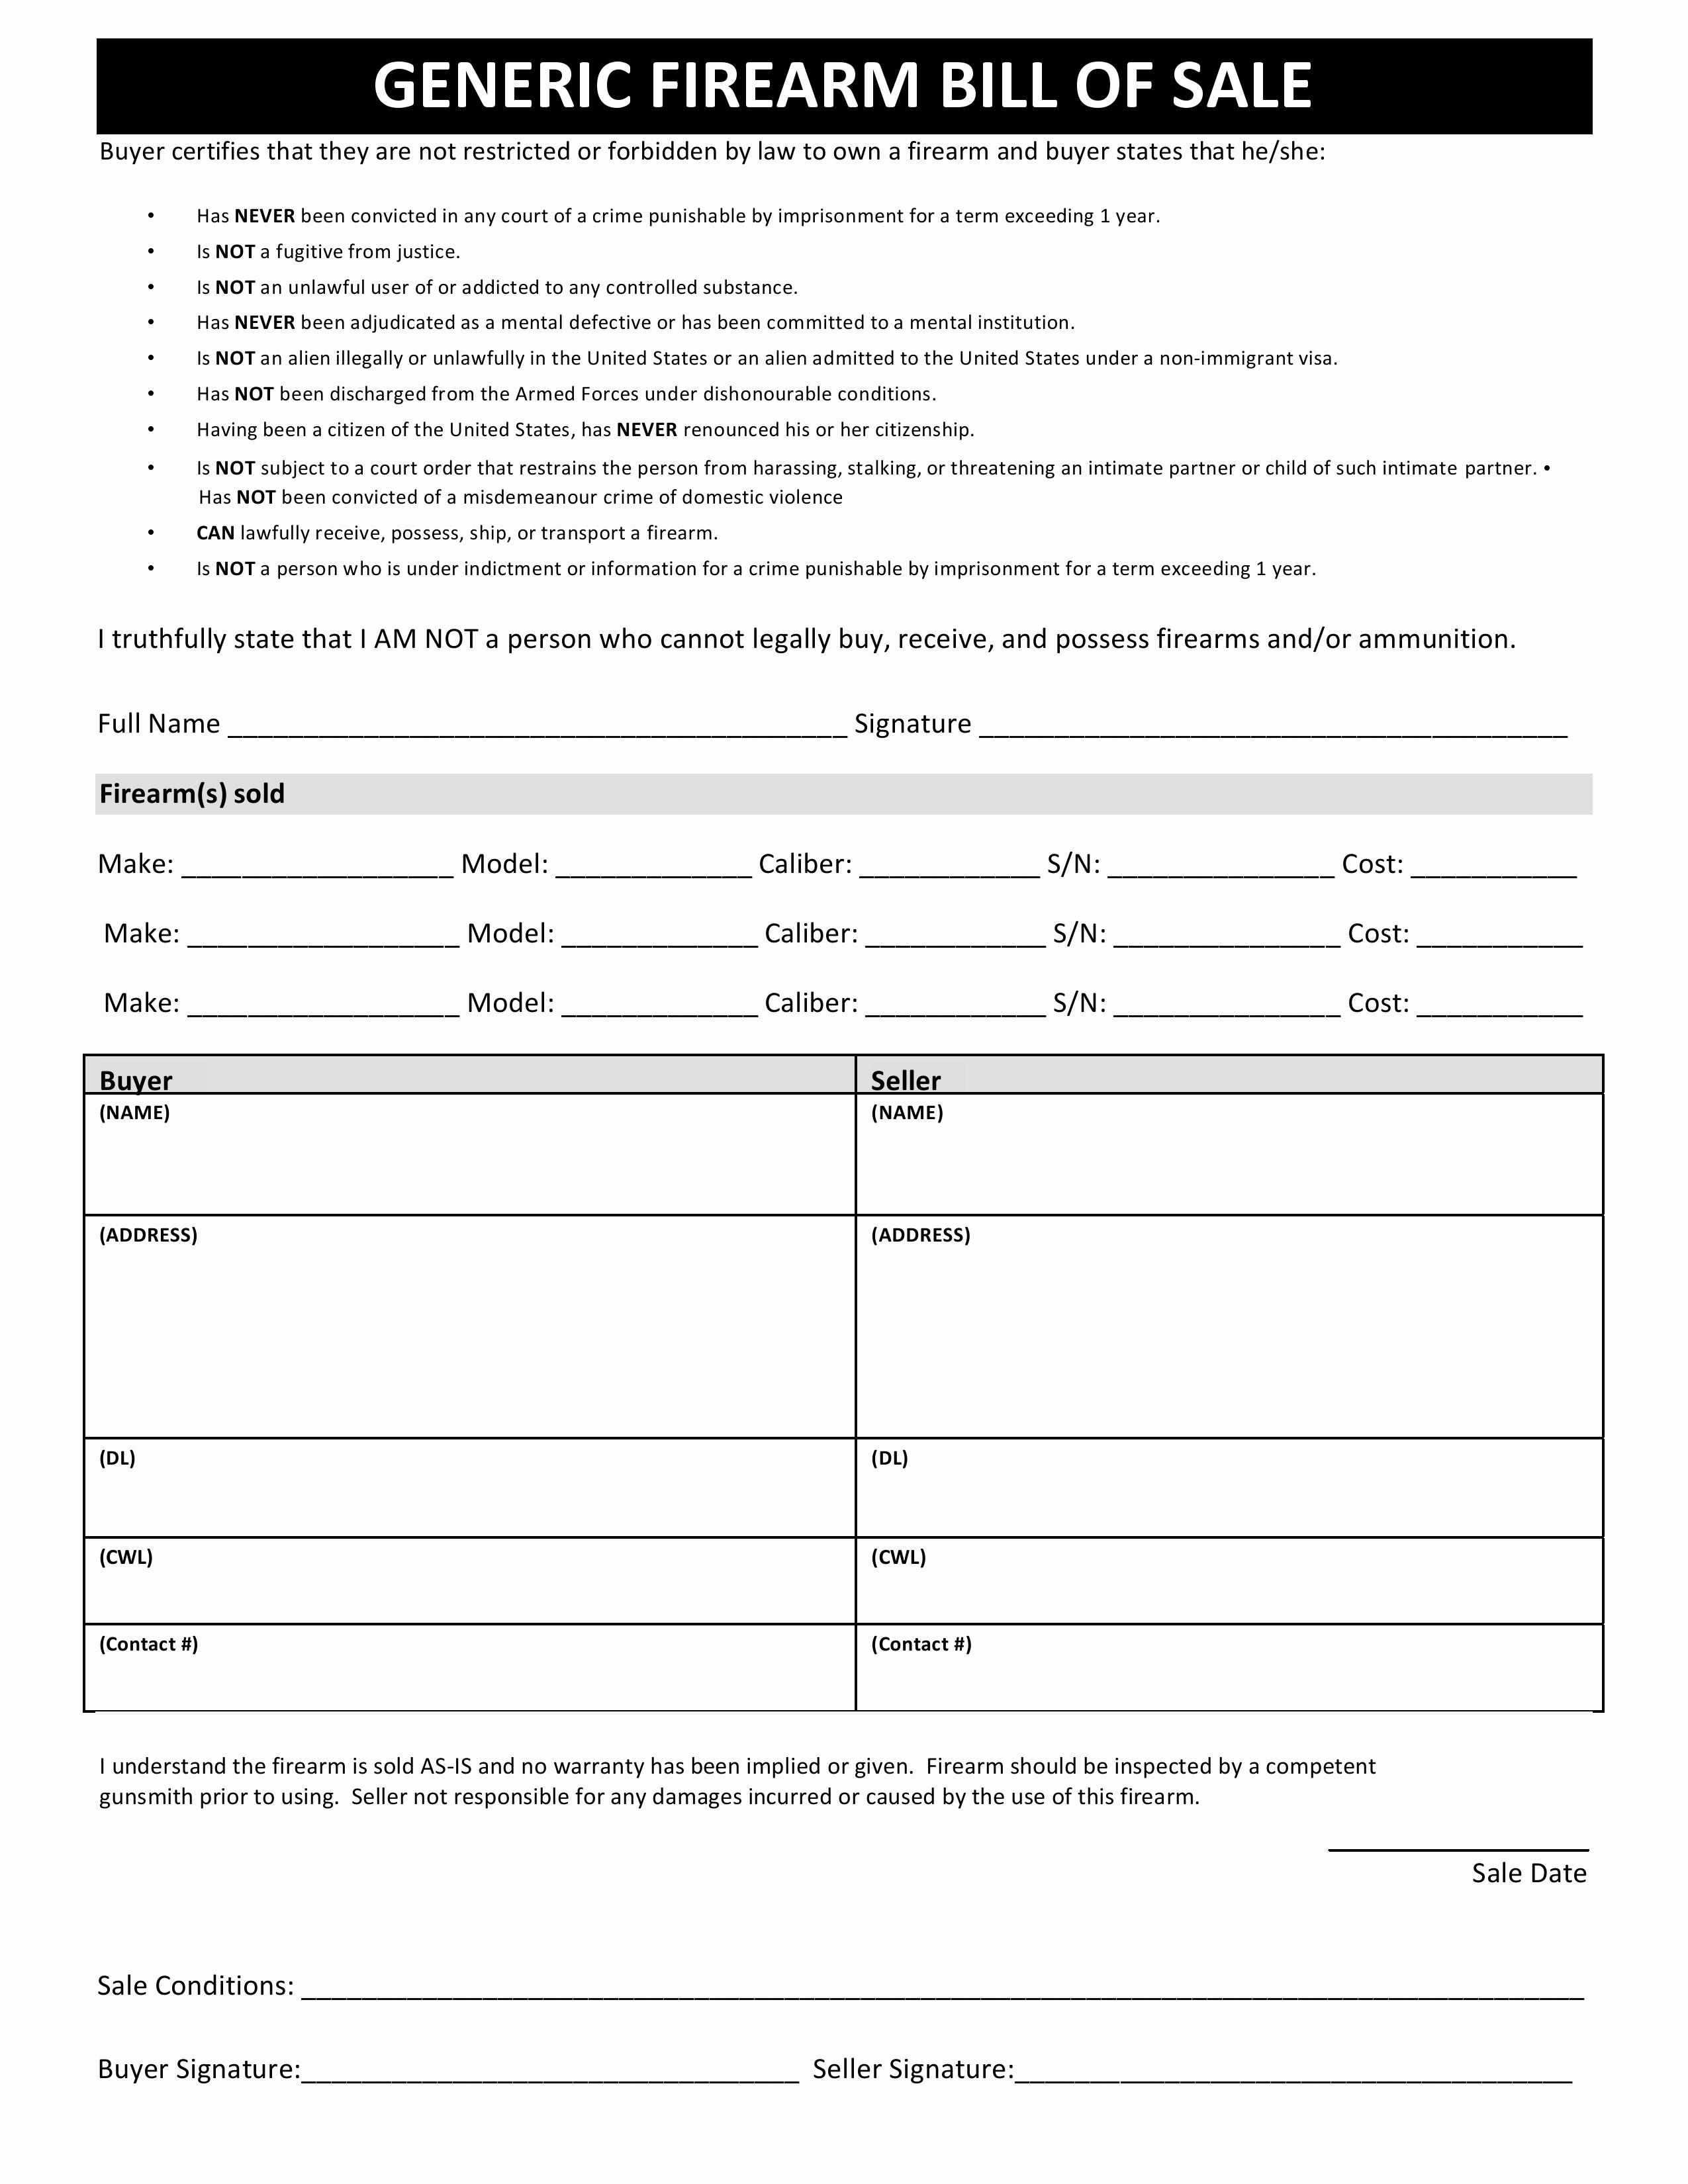 Form for Bill Of Sale Awesome Free Generic Firearm Bill Of Sale form Pdf Word